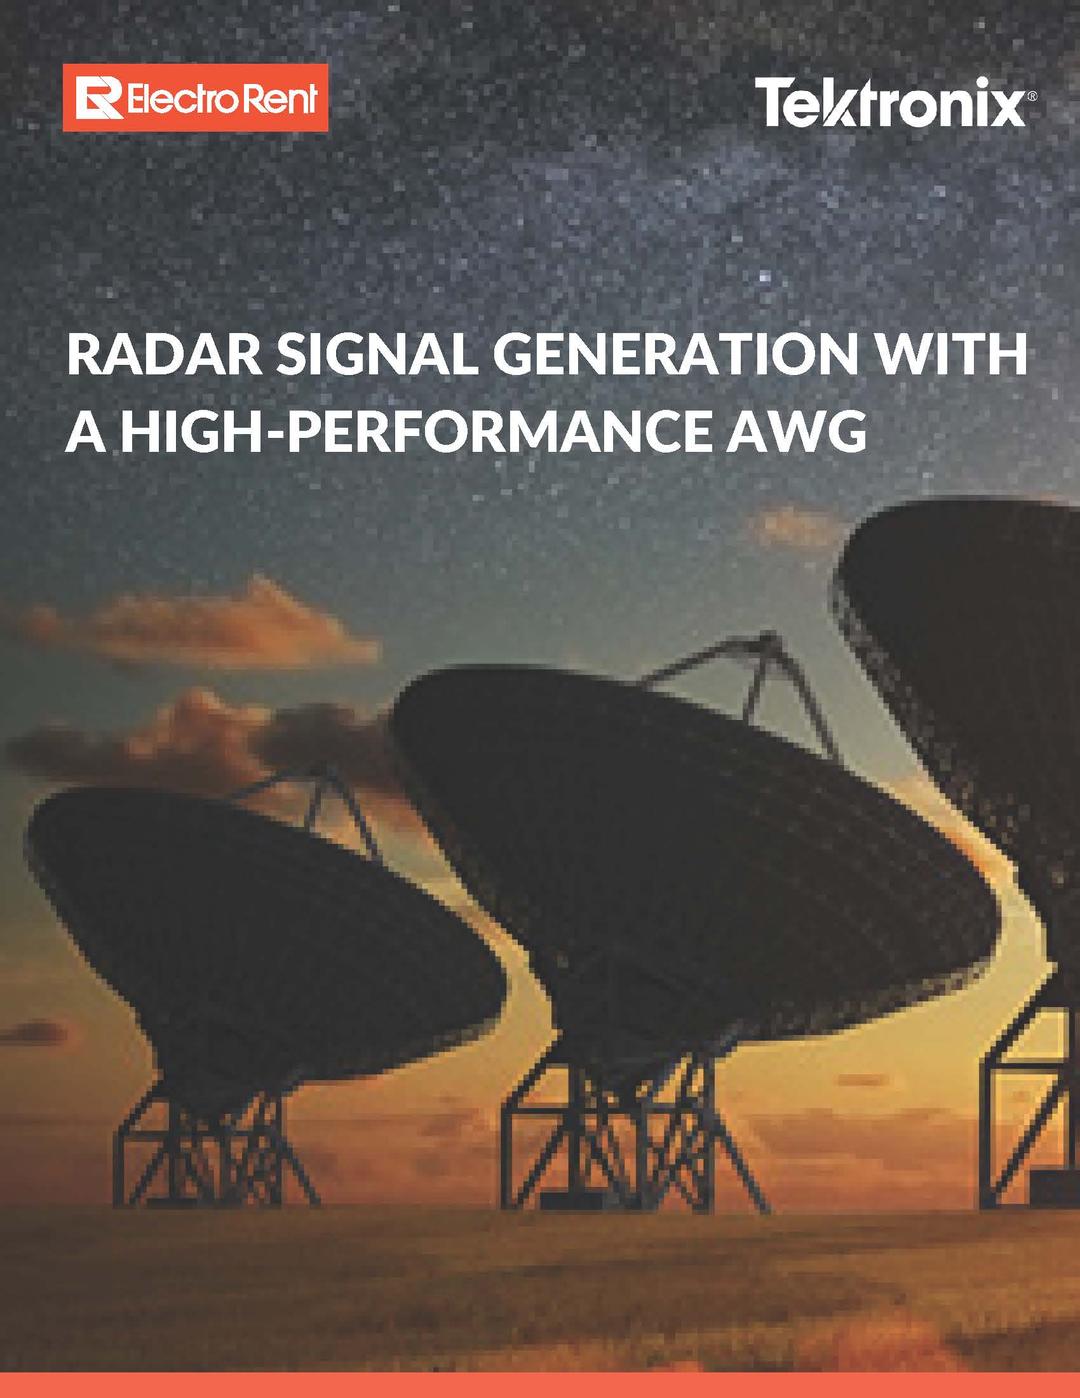 Radar Signal Generation with a High-Performance AWG, image